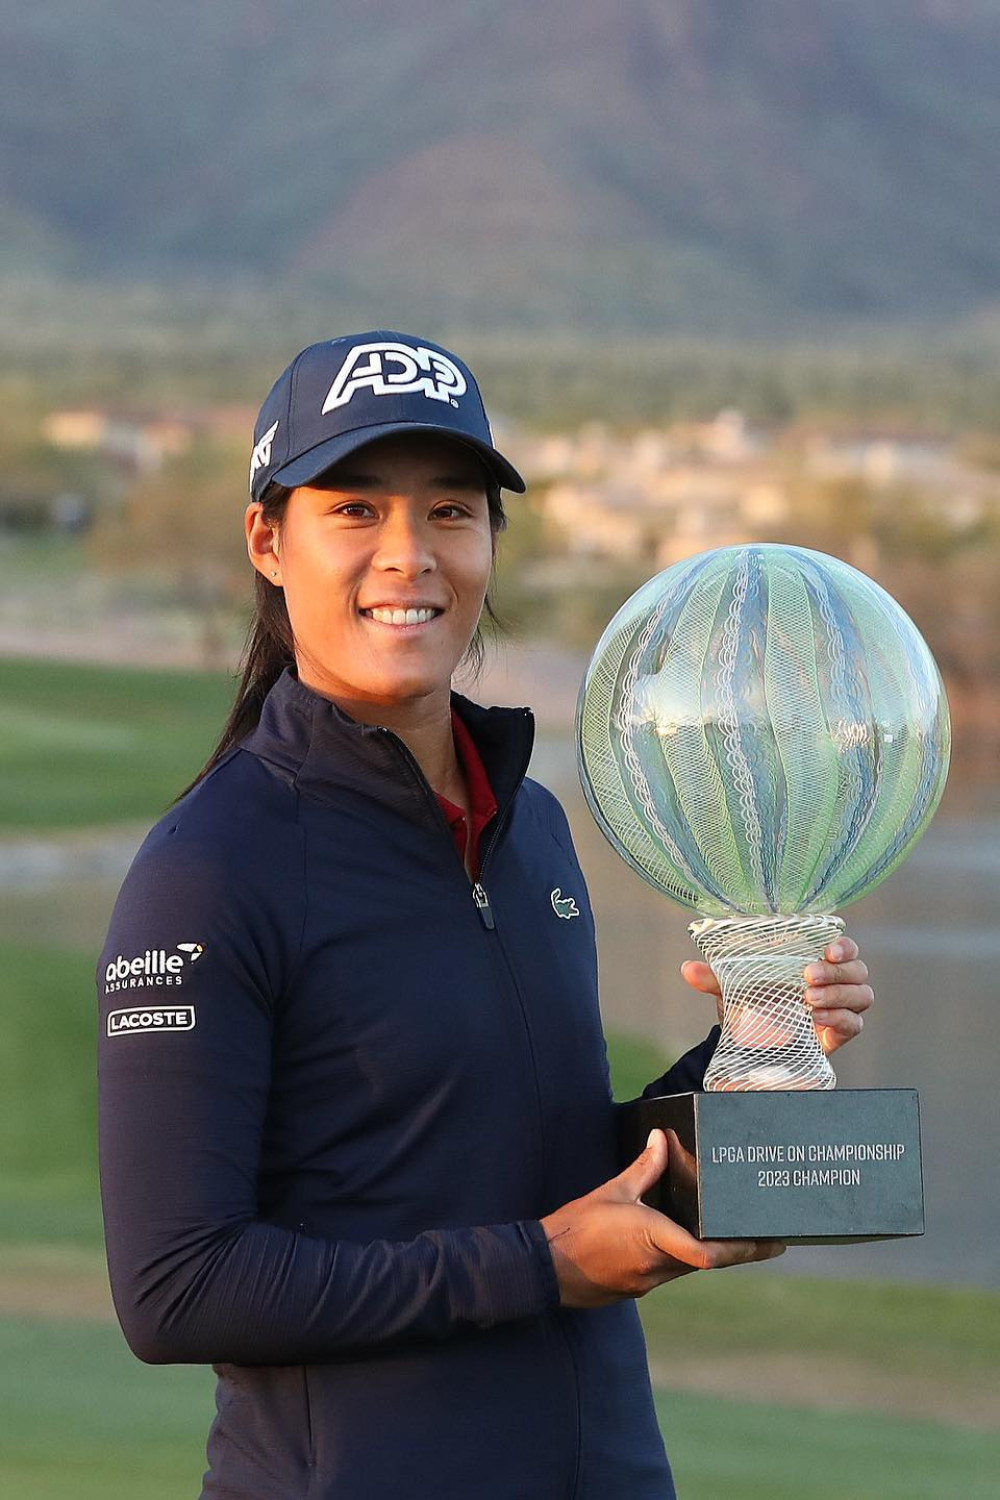 Celine Boutier With Her LPGA Drive On Championship Trophy